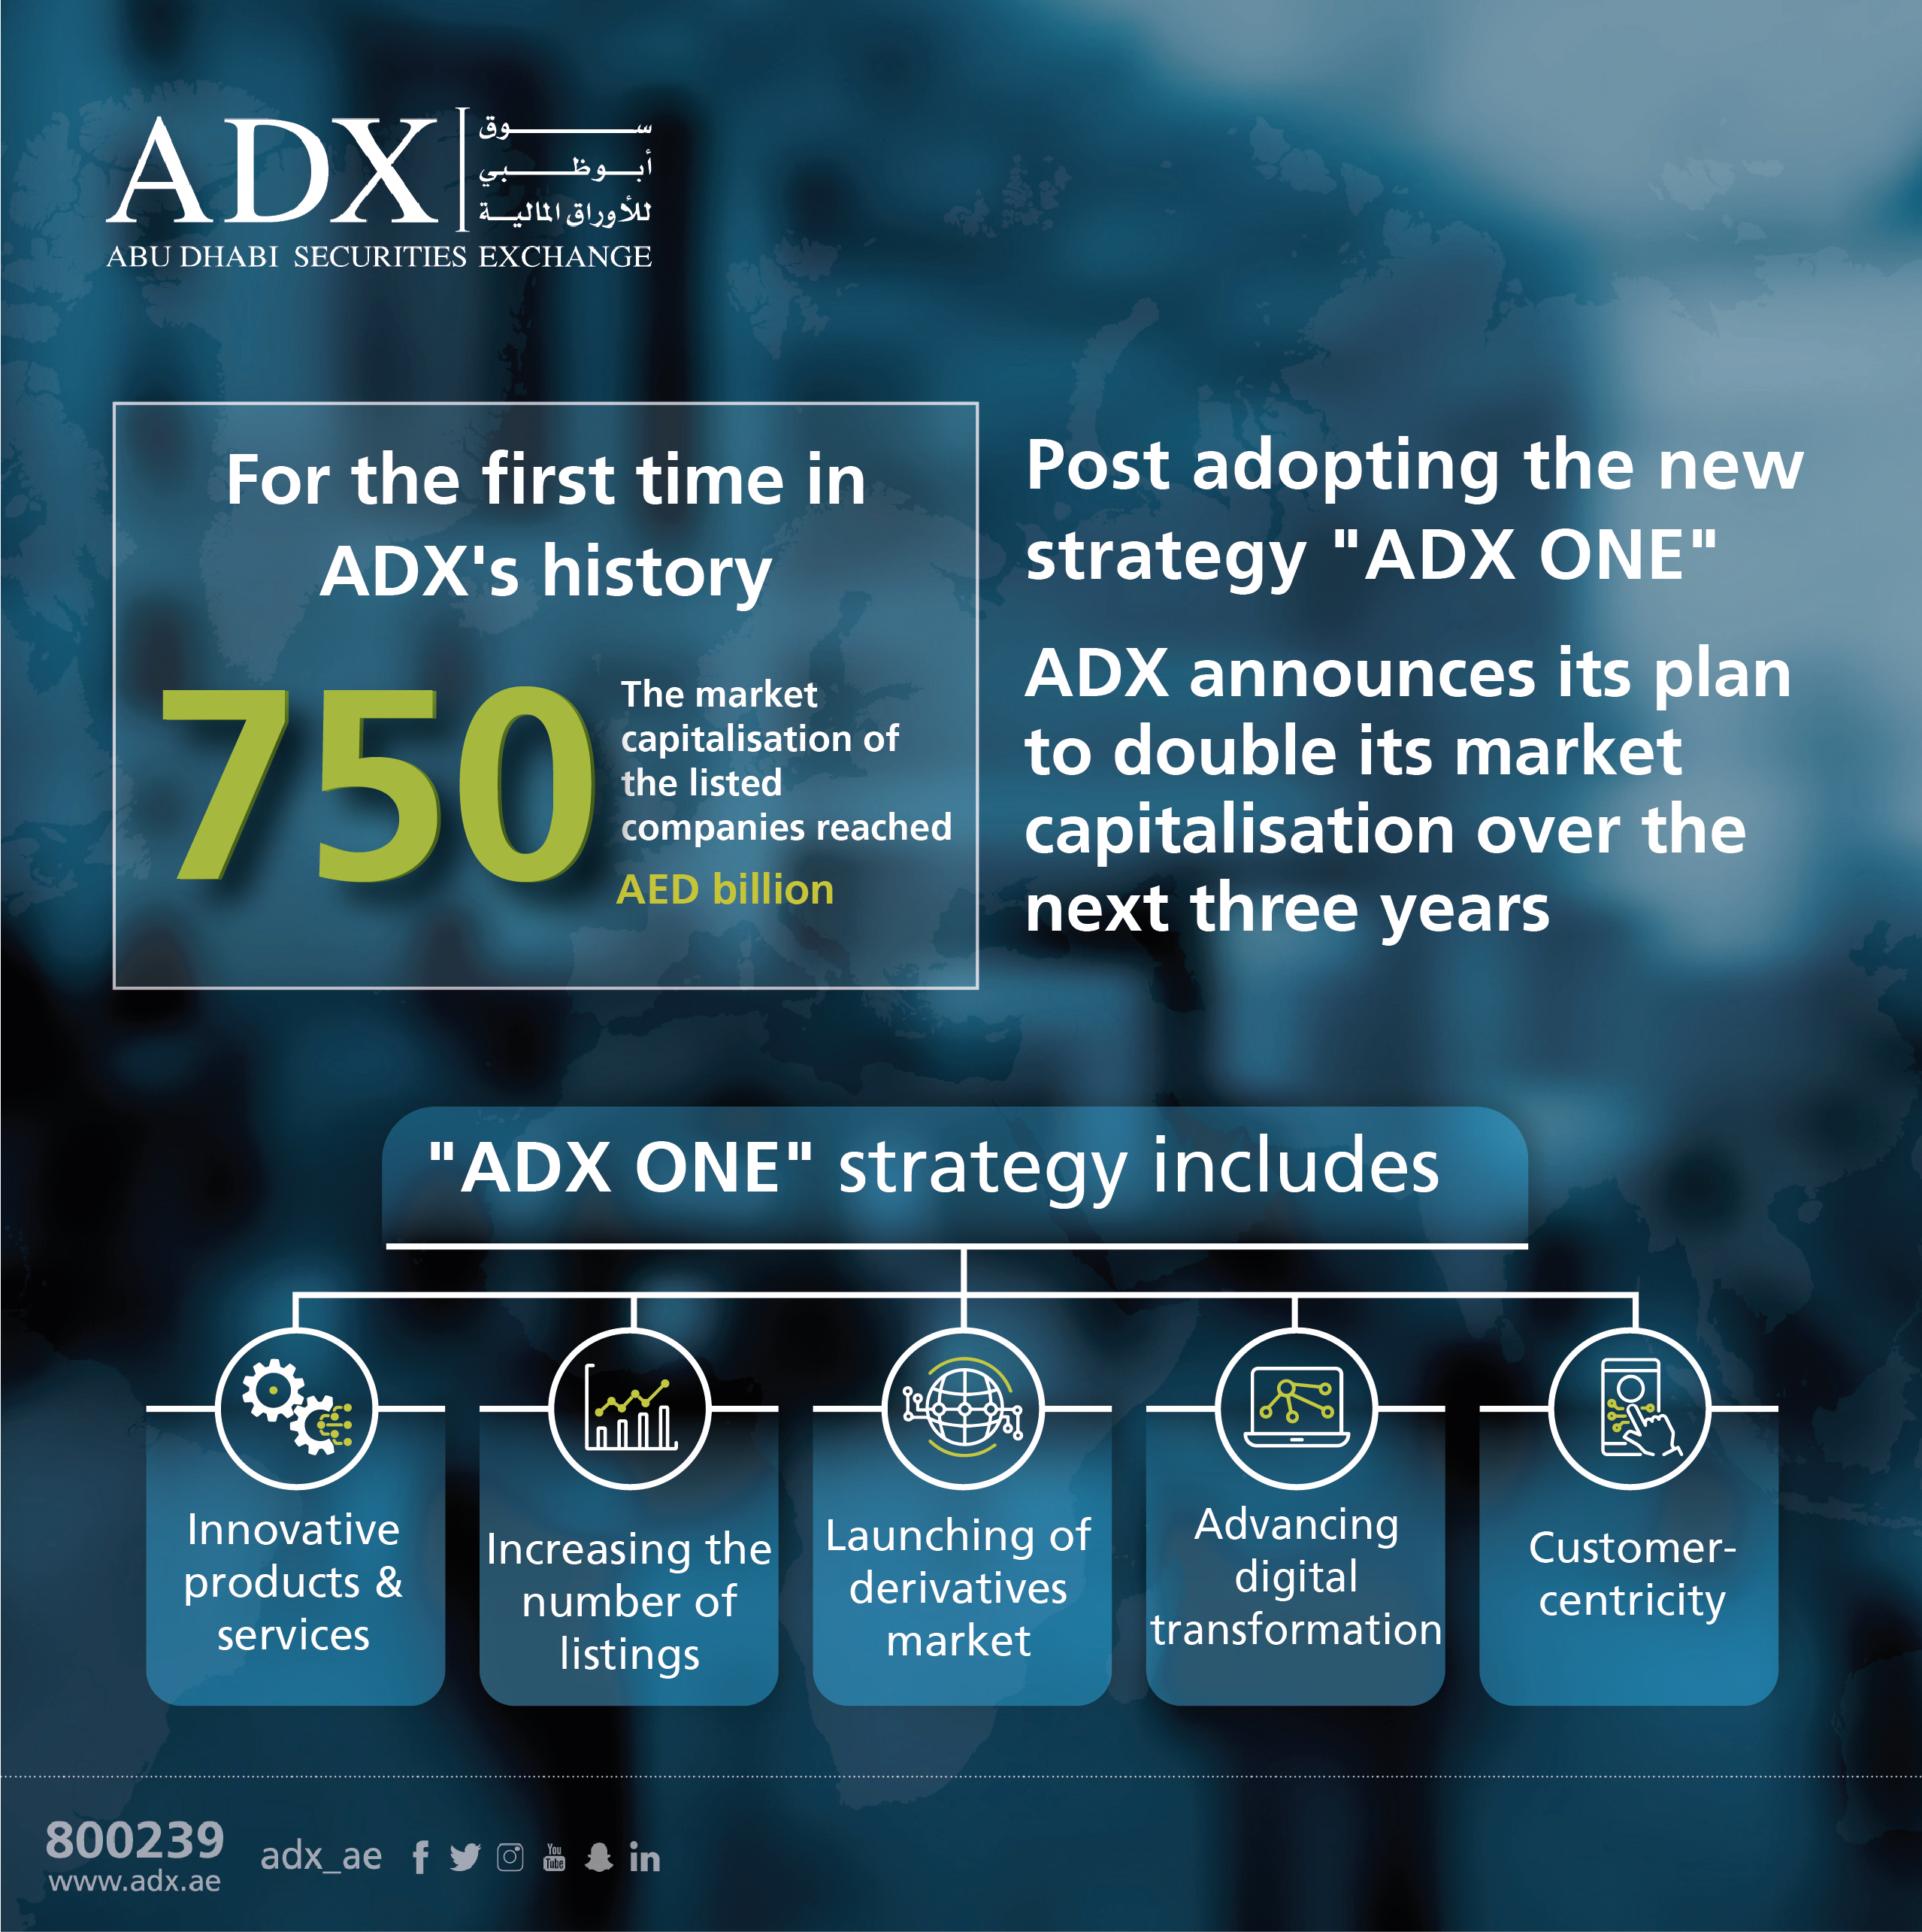 ADX Launches New Strategy To More Than Double Market Capitalisation Over The Next Three Years